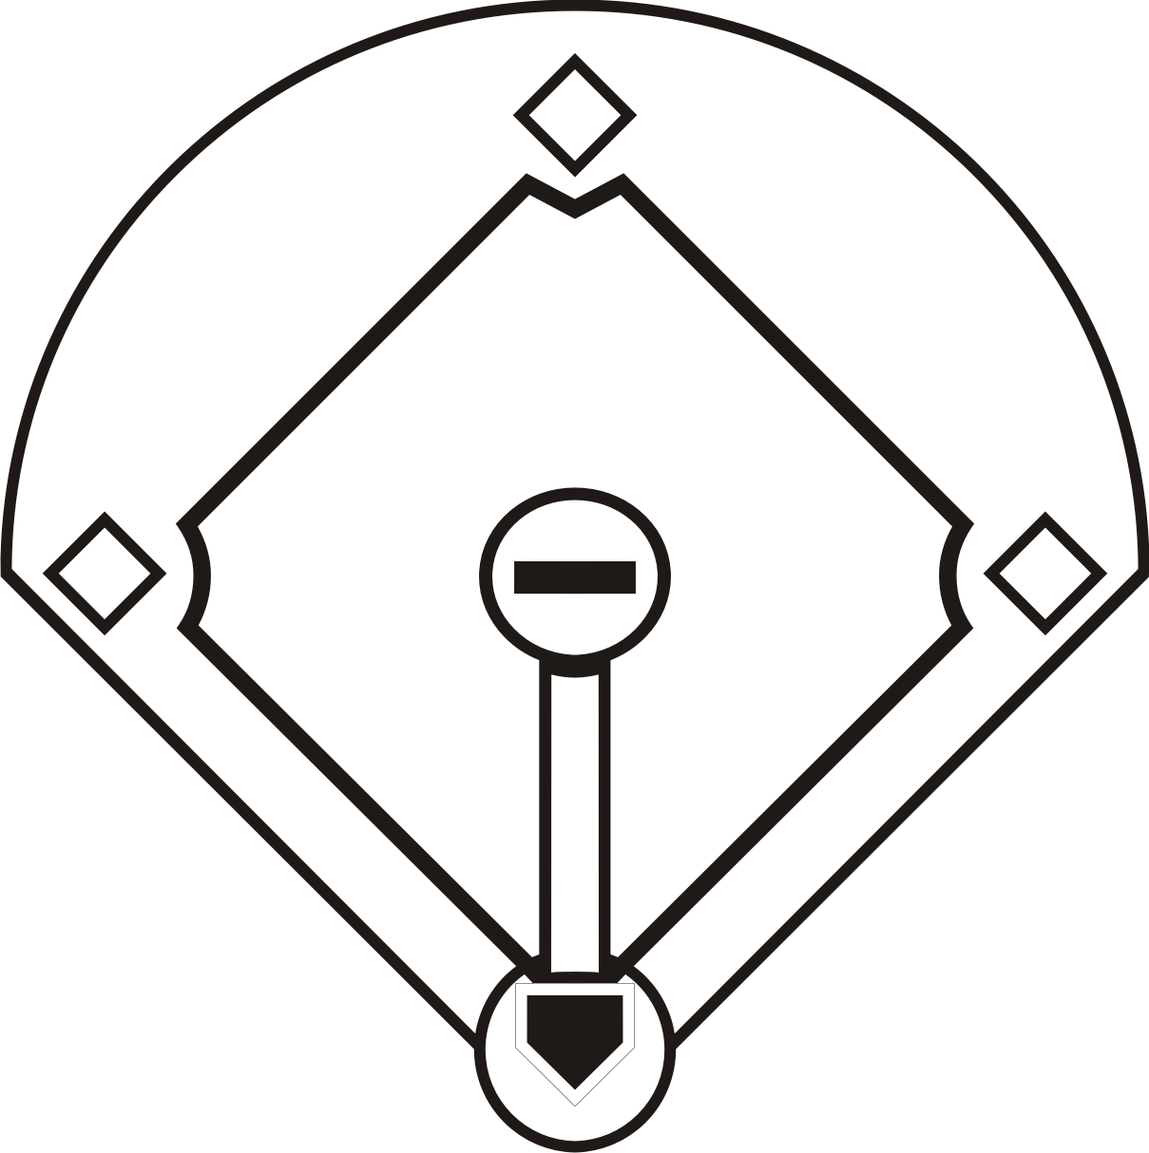 Picture Of Baseball Diamond Clipart - Free to use Clip Art Resource